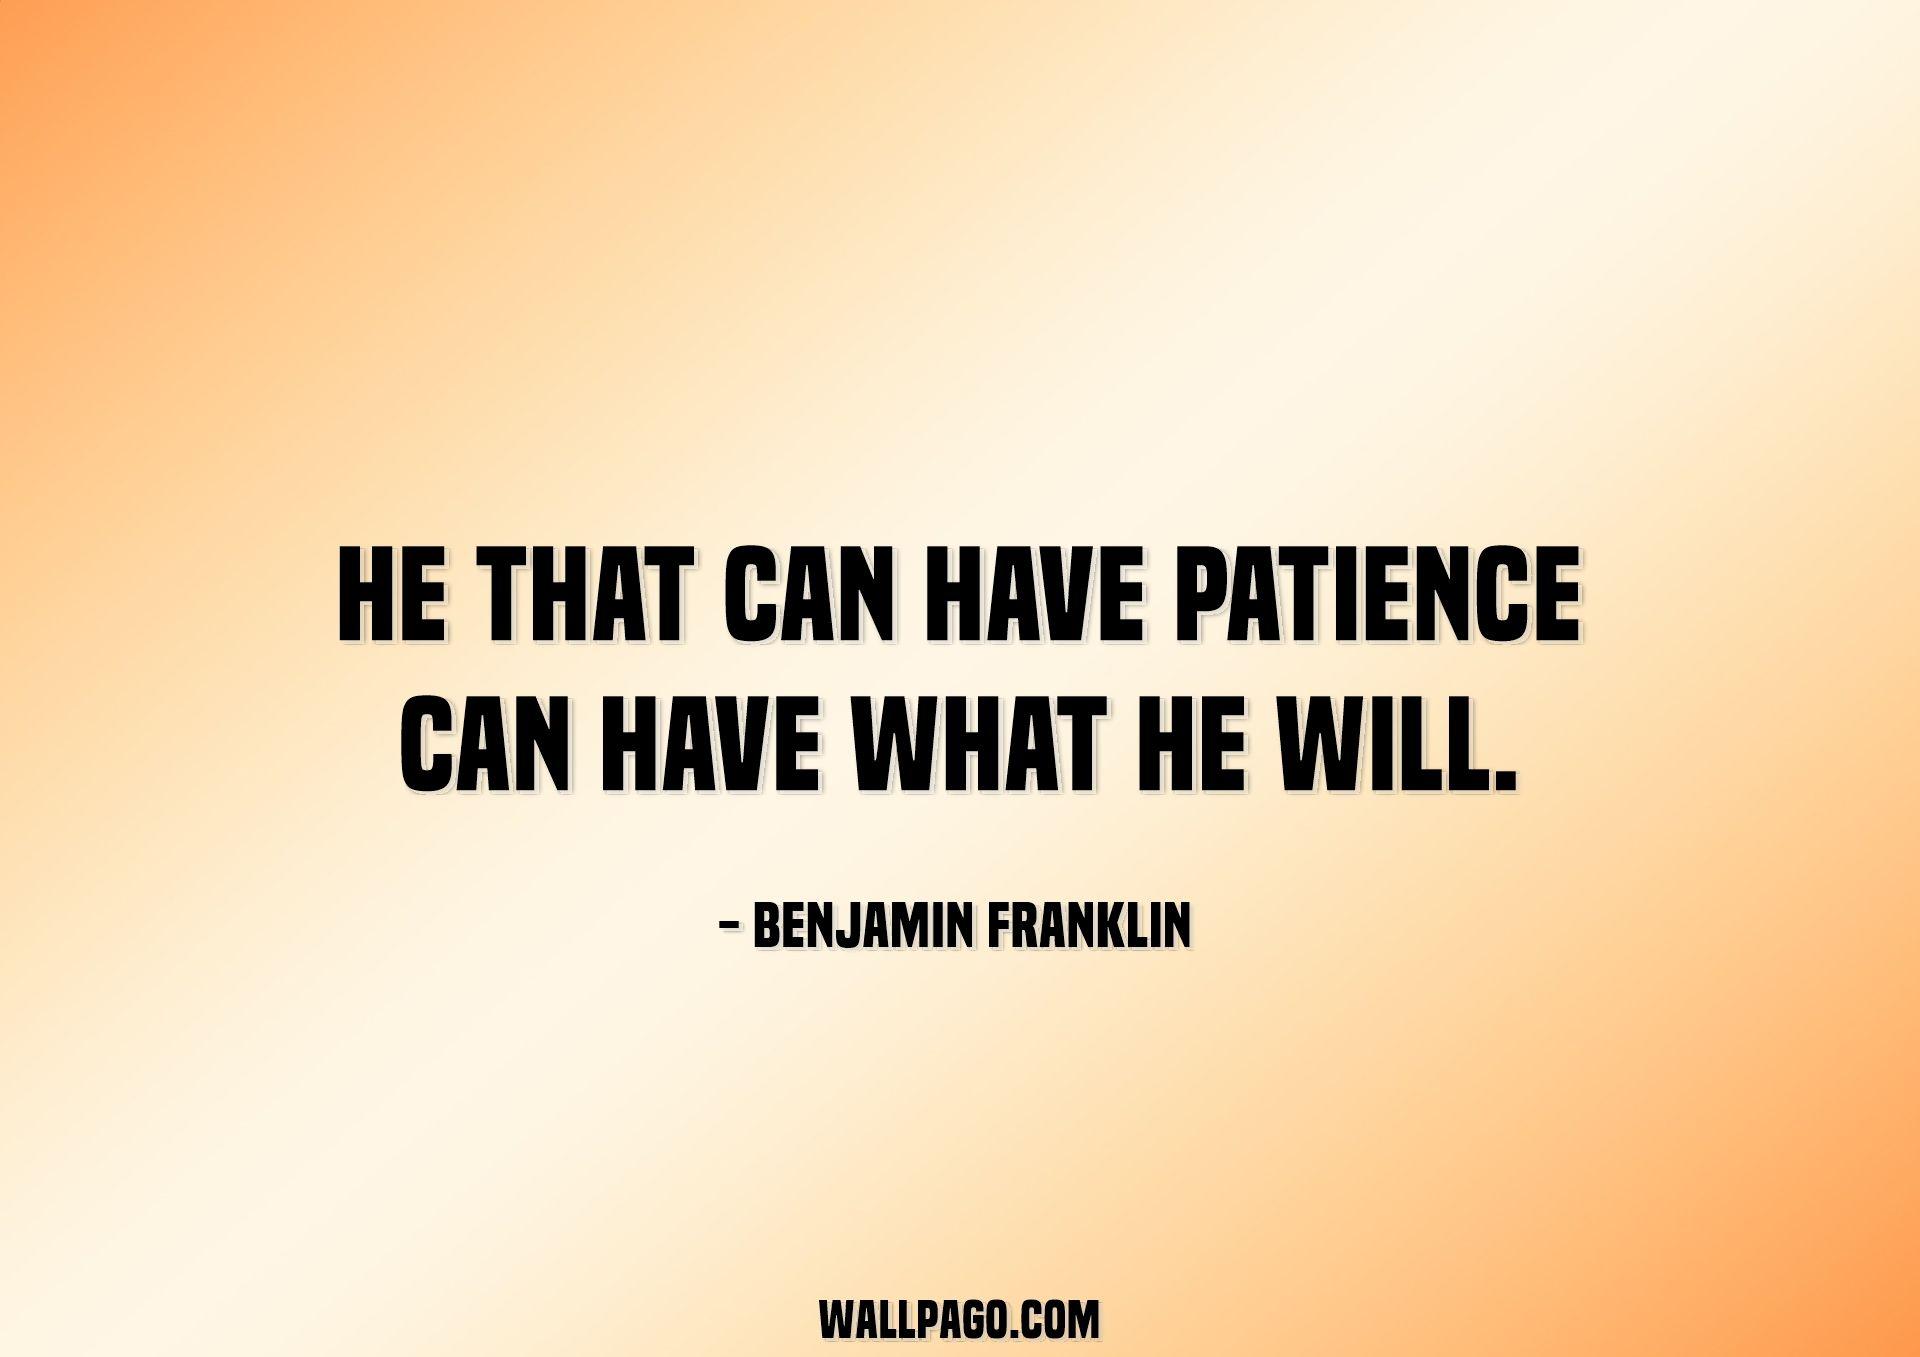 Quote about patience. Quotes Wallpaper. WALLPAGO